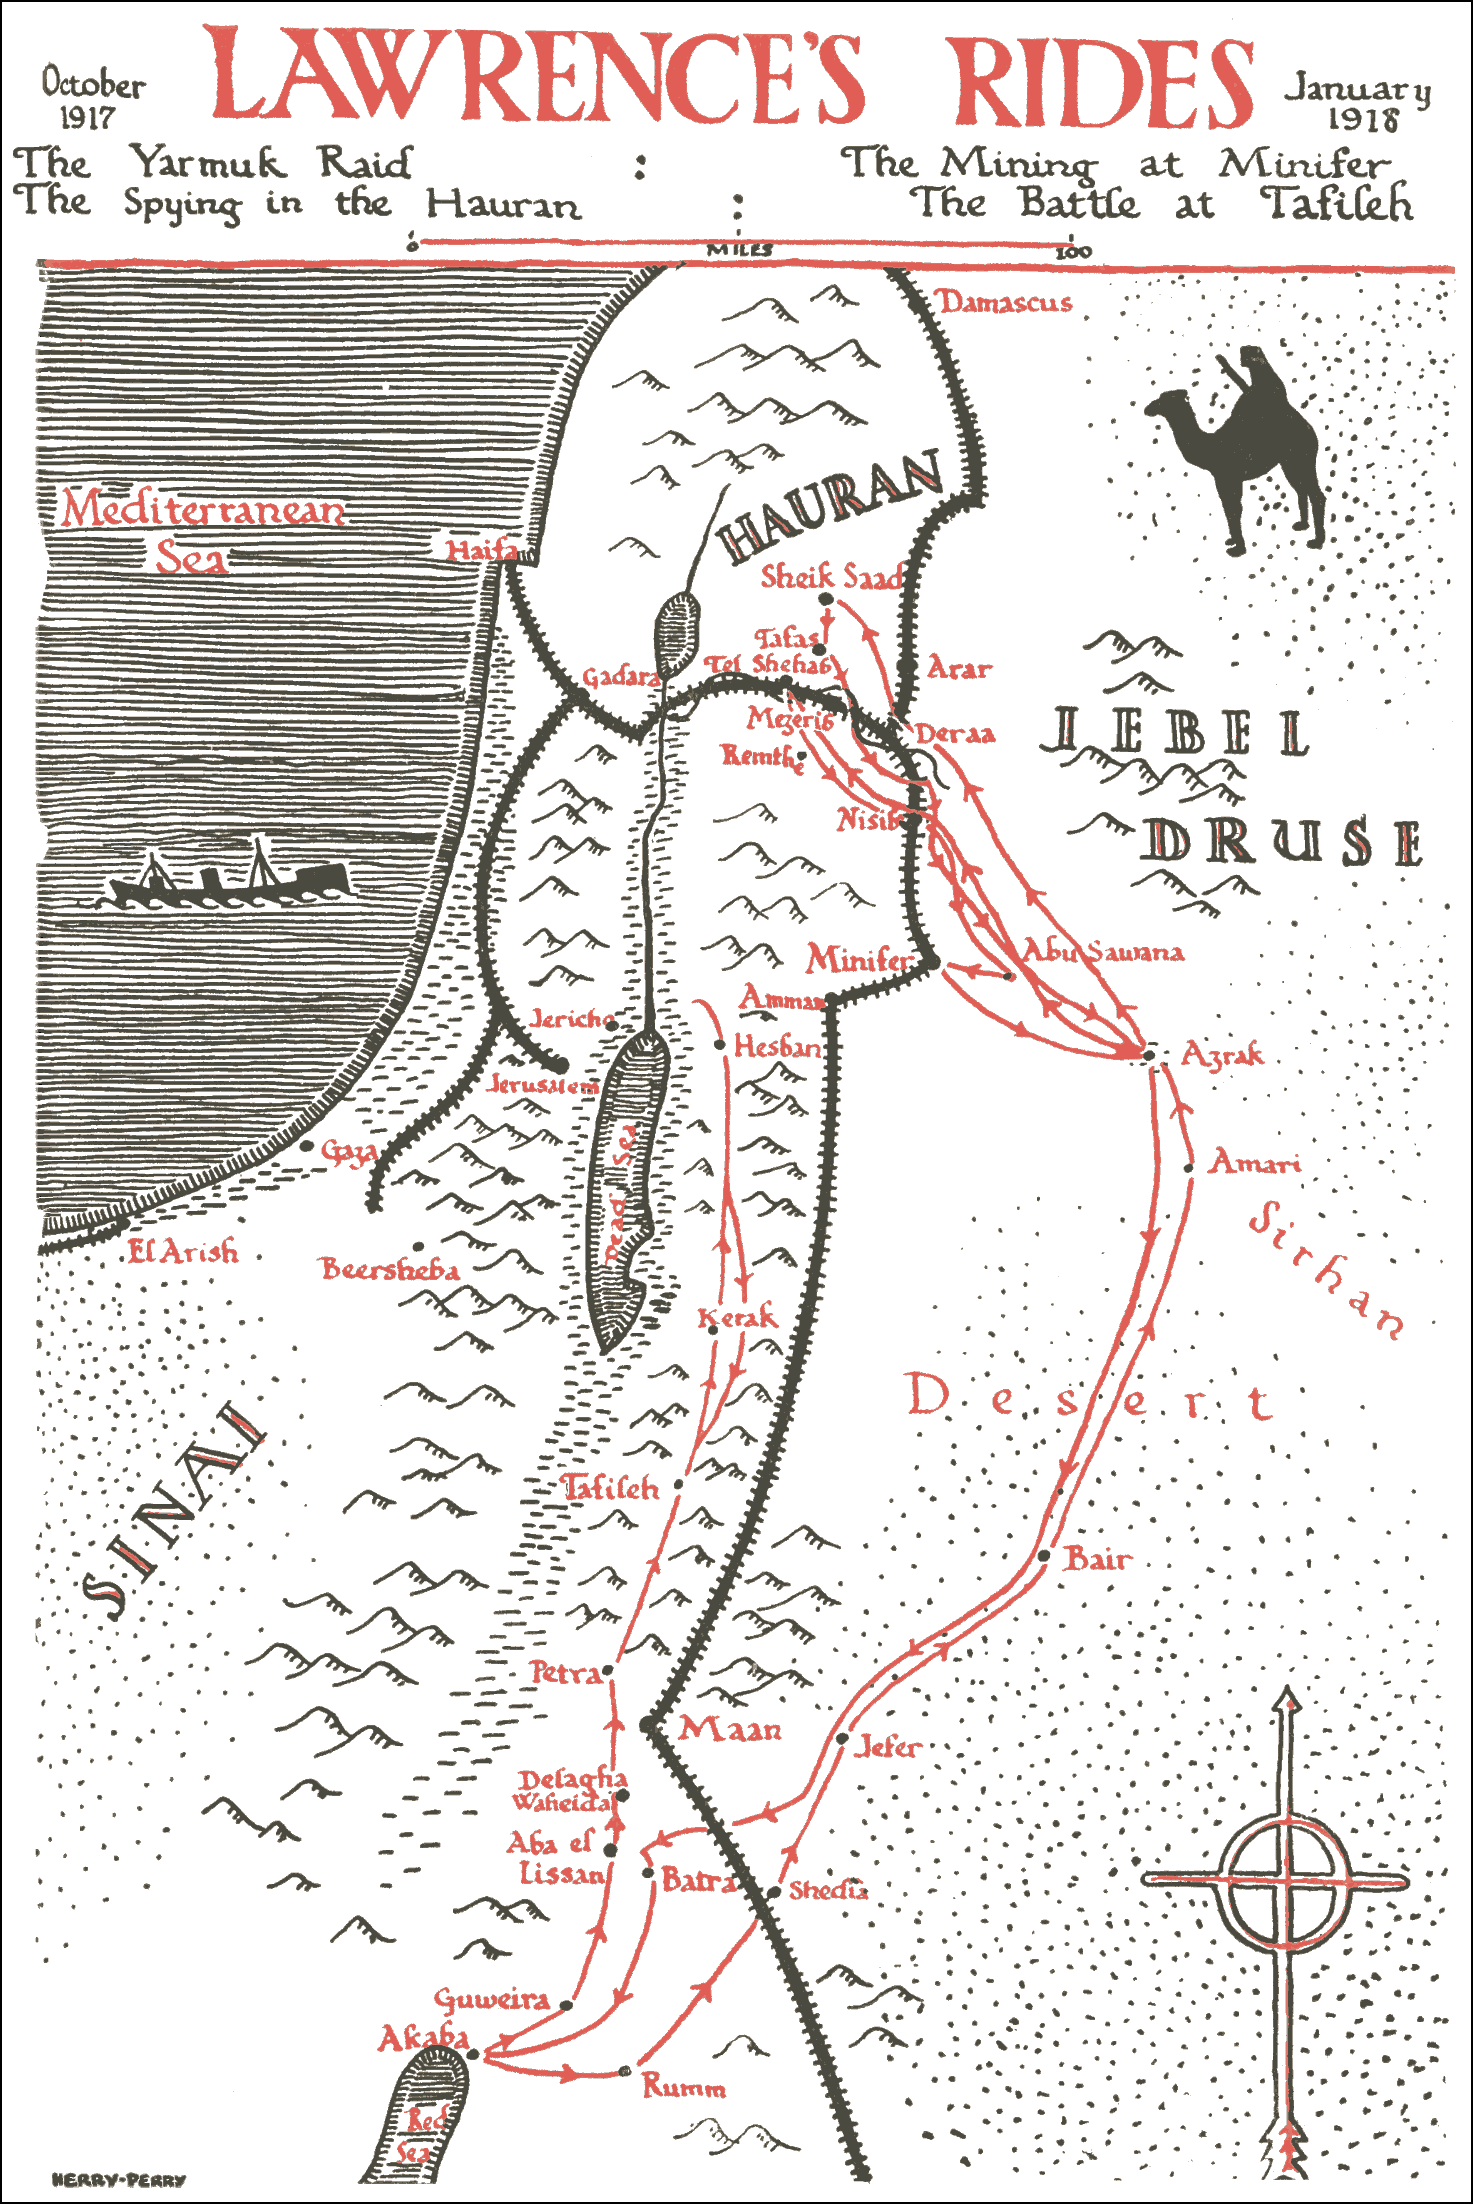 Map of area around Dead Sea with Lawrence’s travel paths indicated